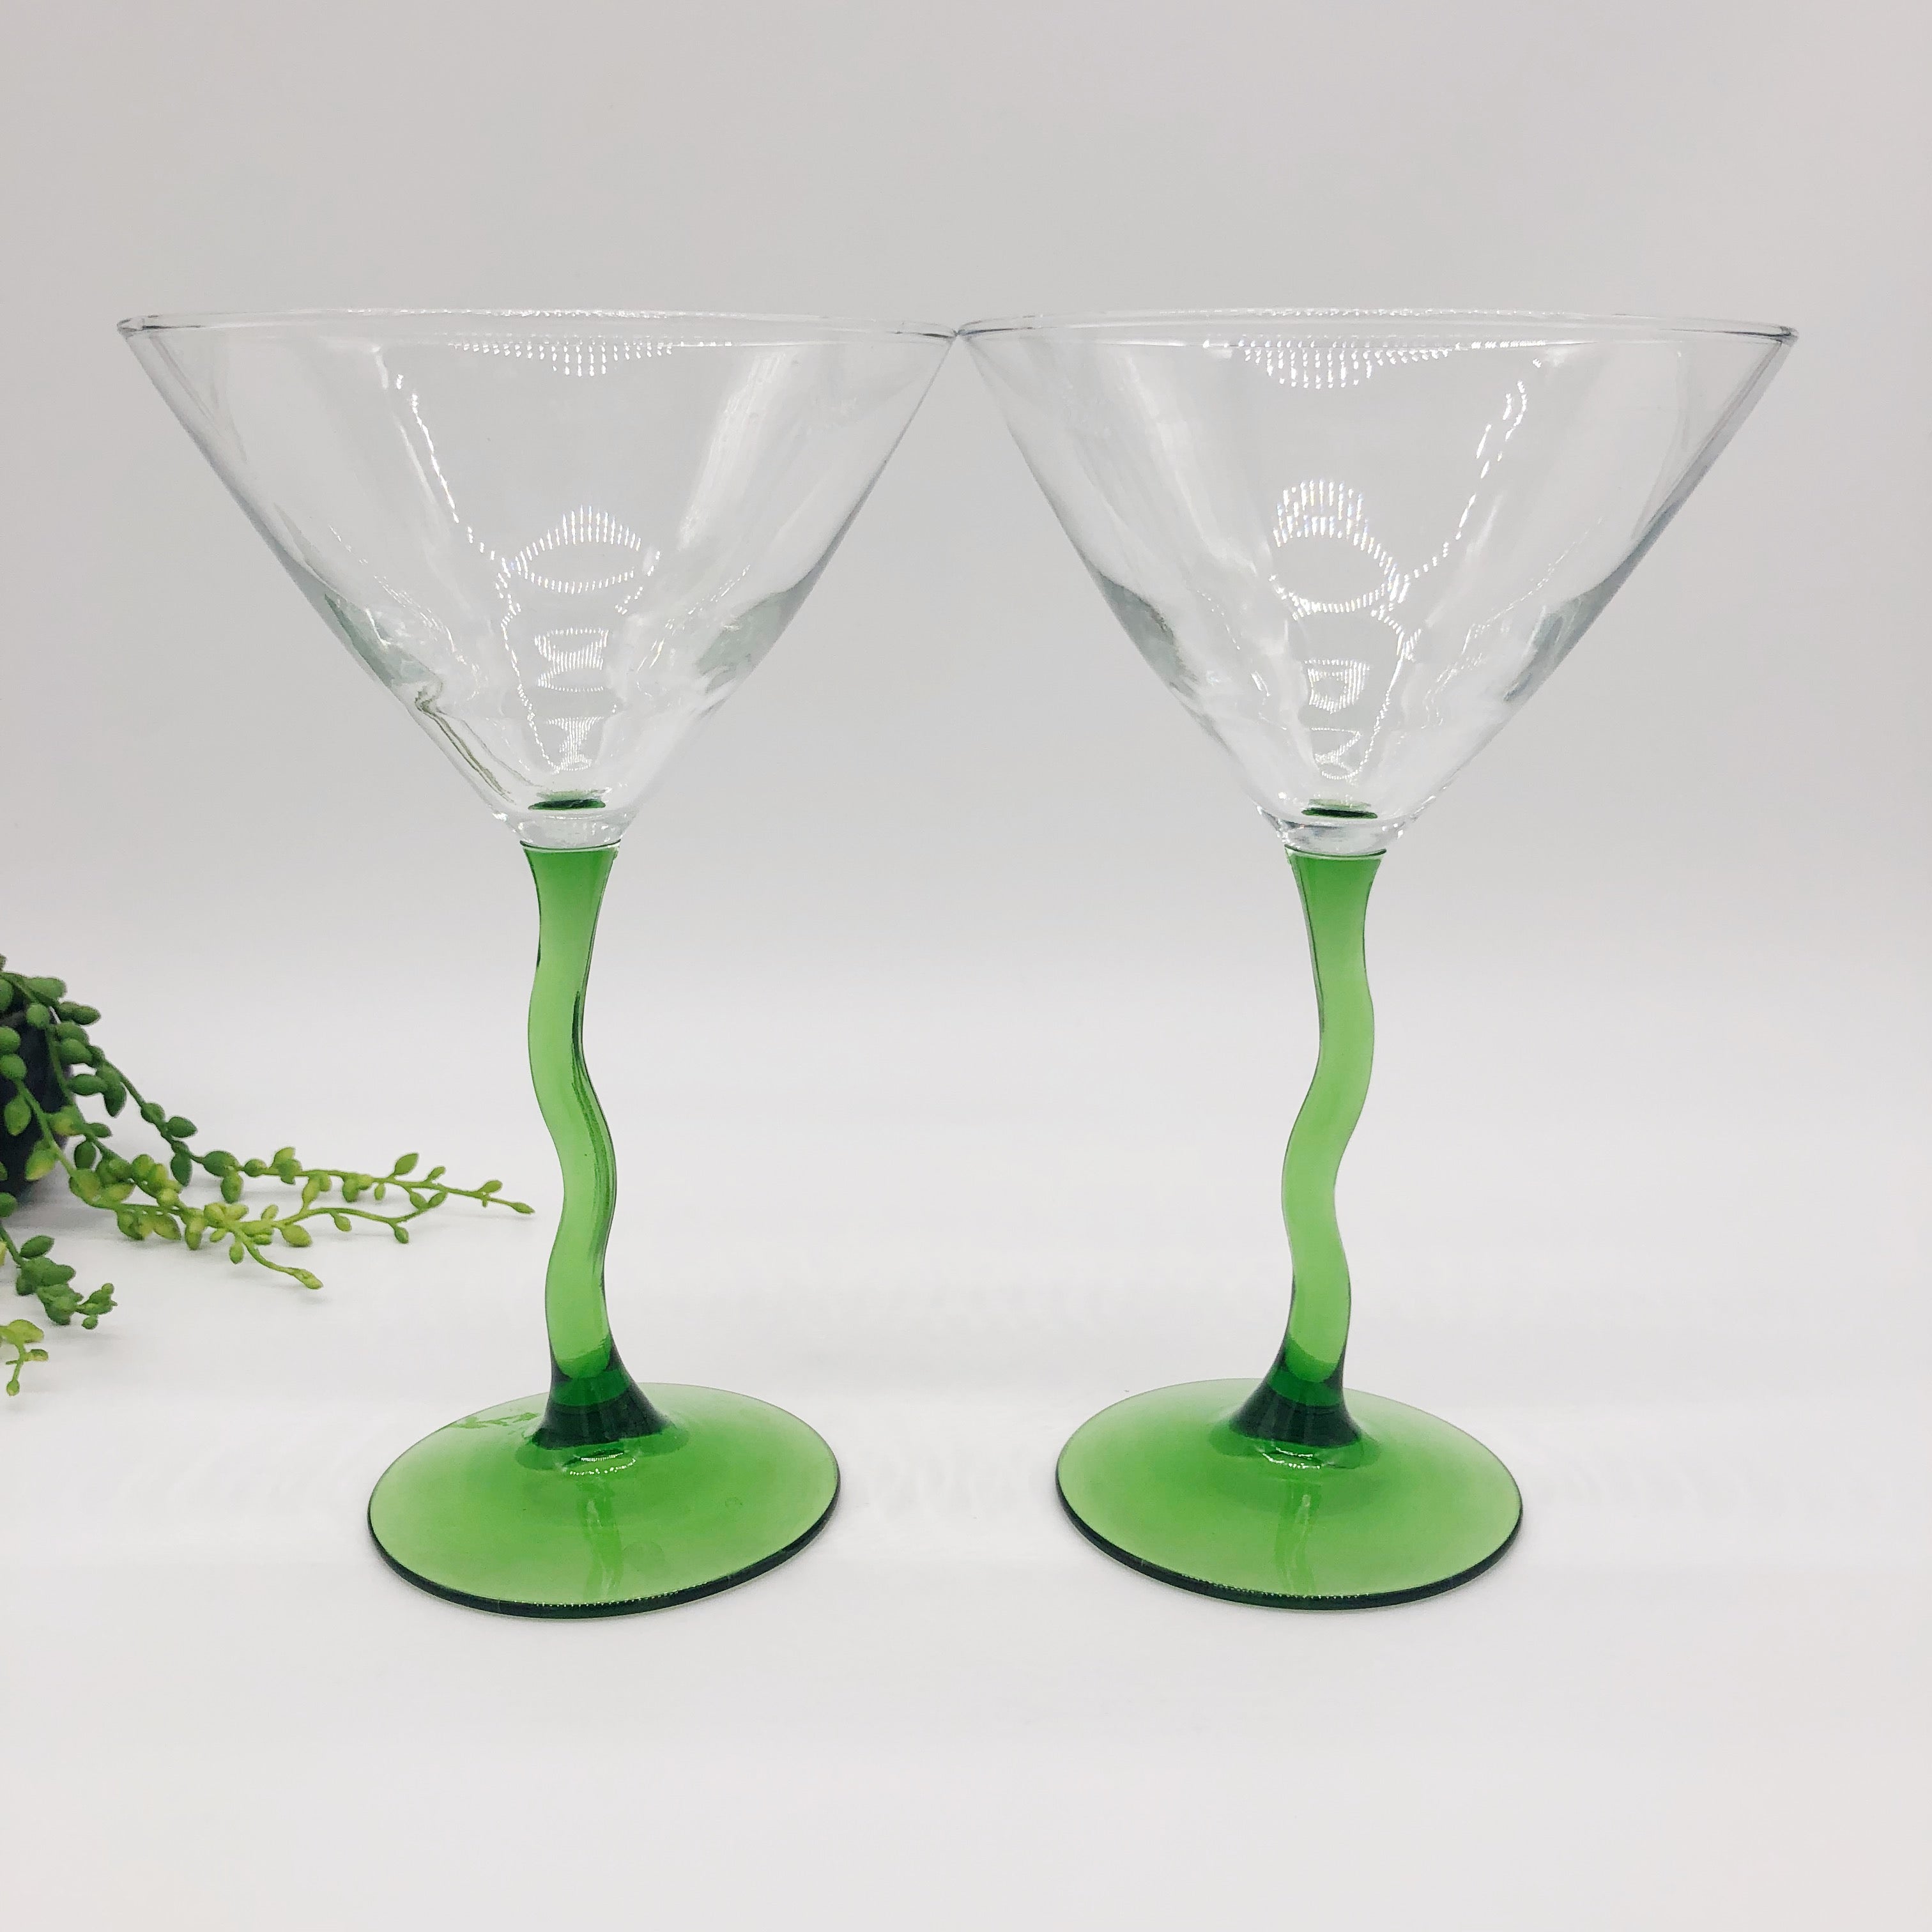 Martini Glasses, Woodworking Project